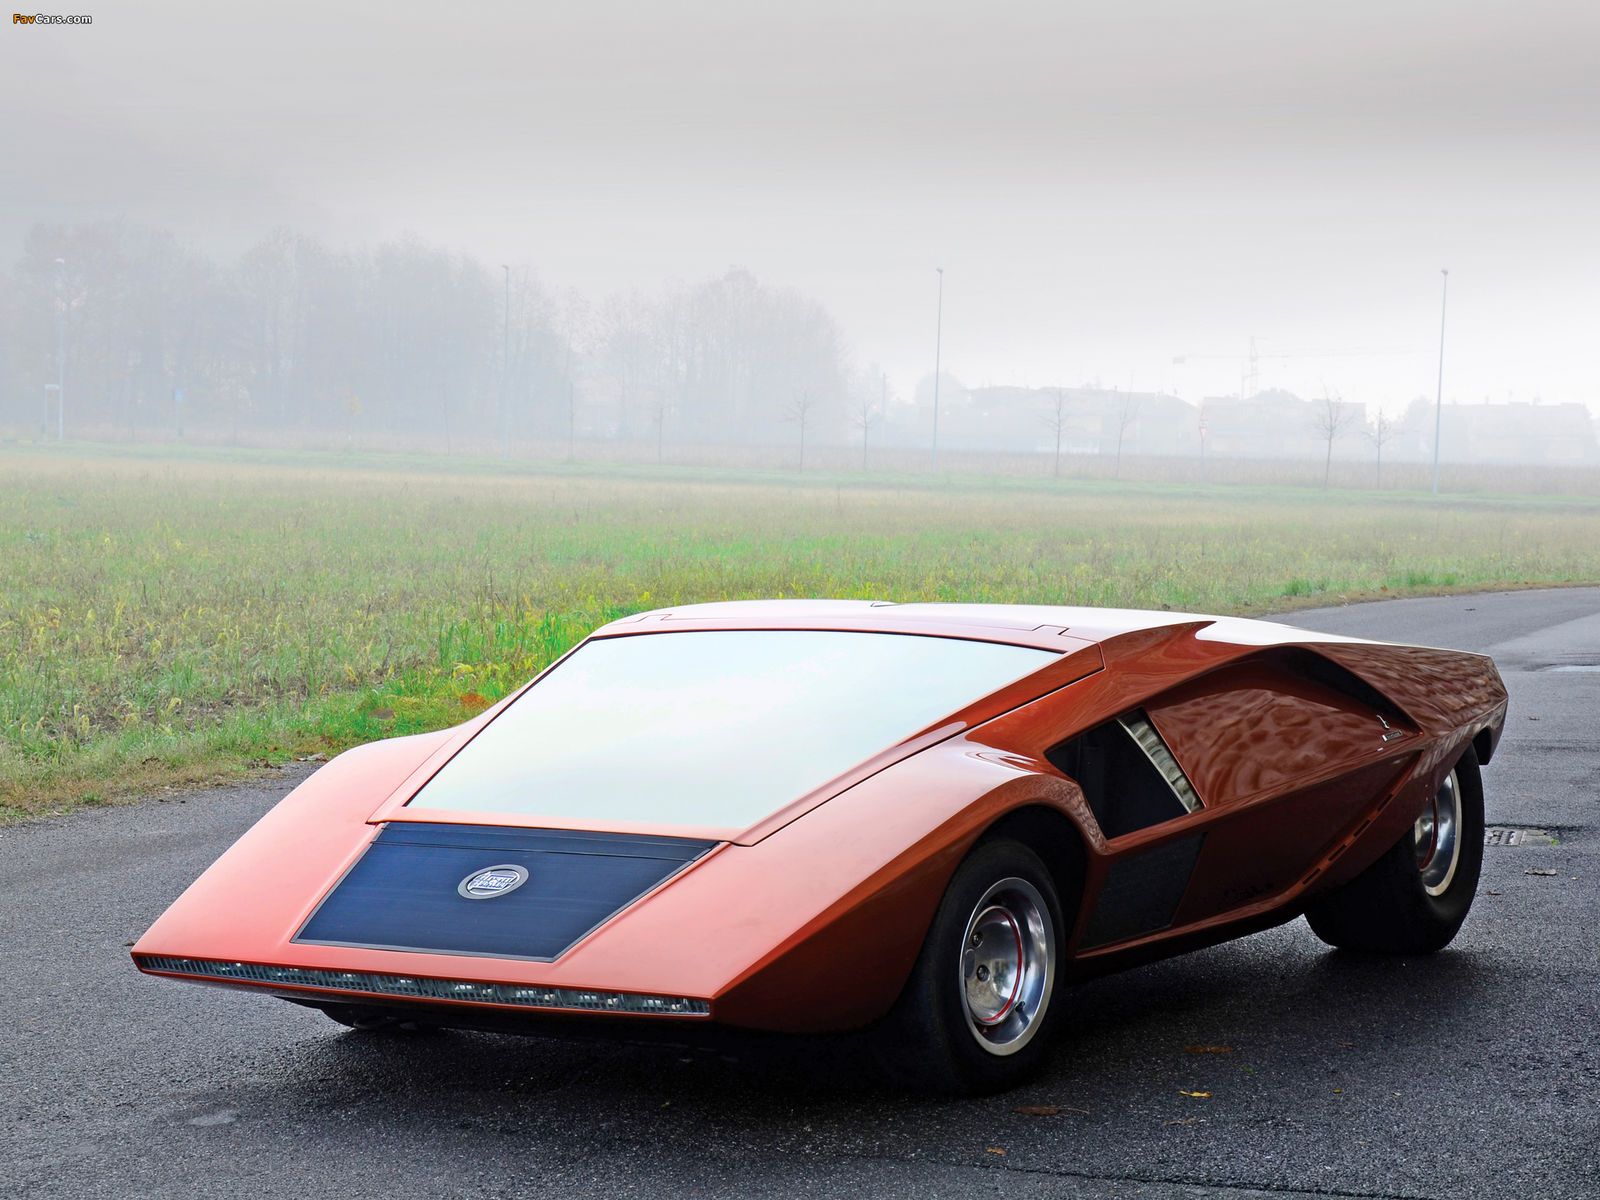 30 incredibly bonkers and beautiful cars from the 1950s to now image 25